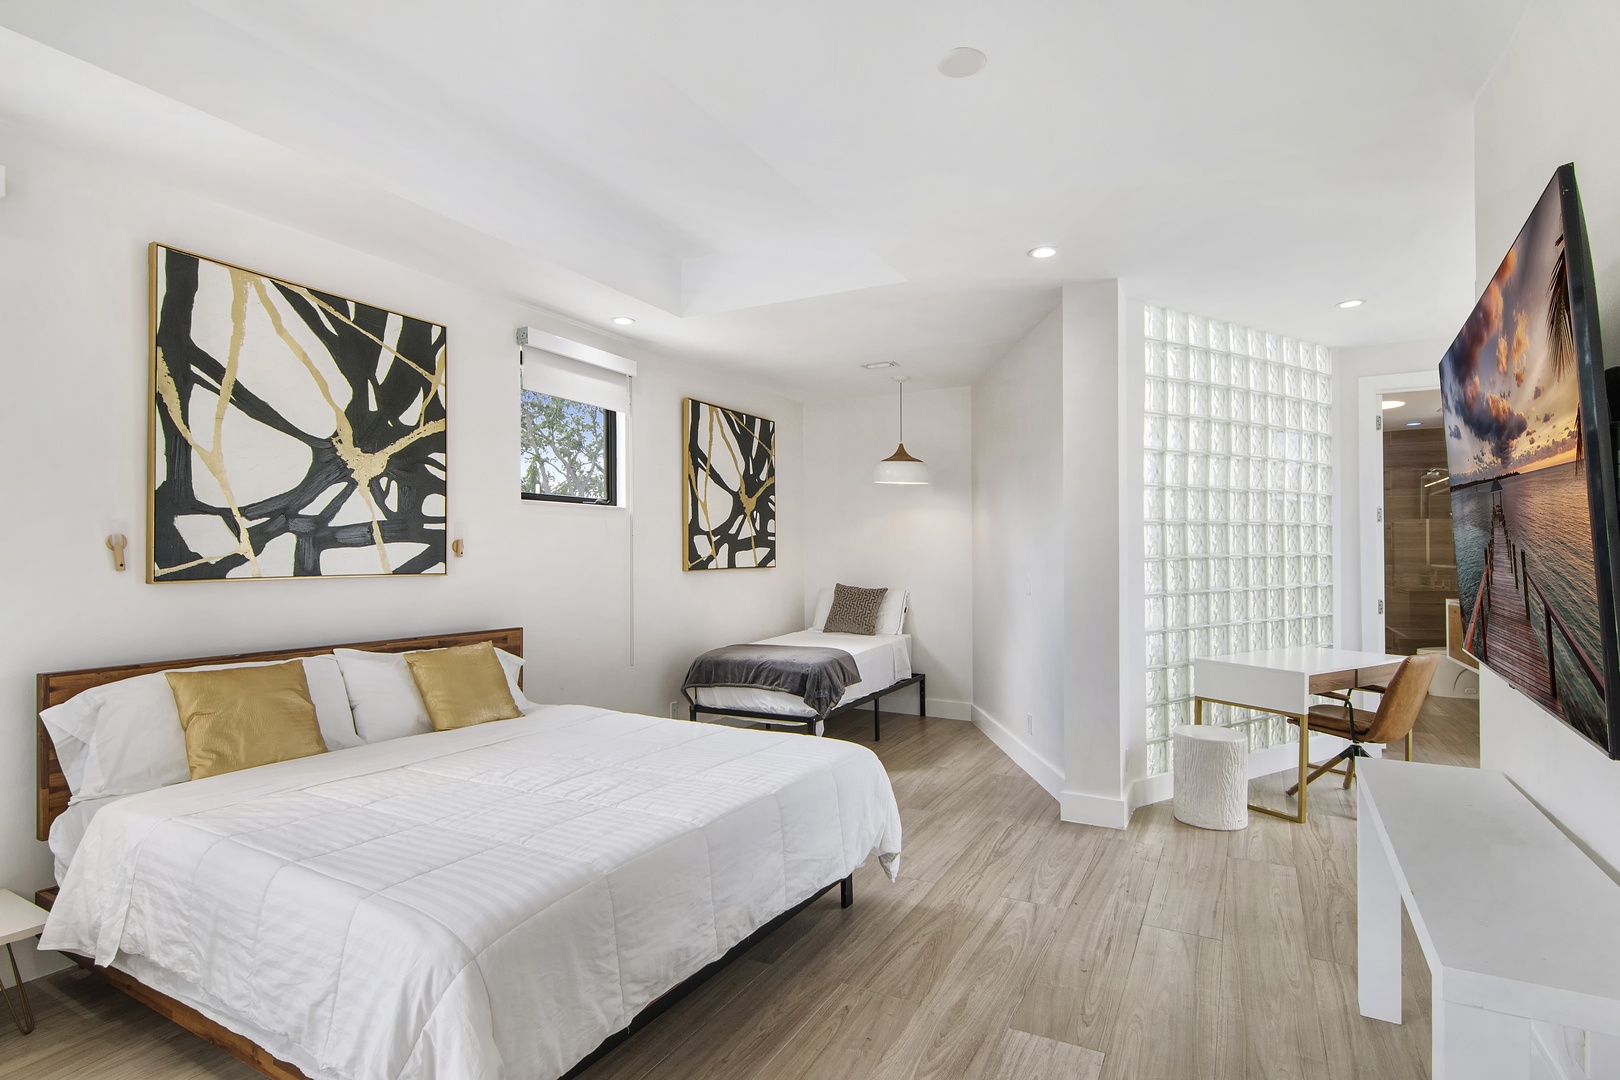 The 3rd floor suite boasts a king bed, twin pull-out, ensuite, balcony, & Smart TV